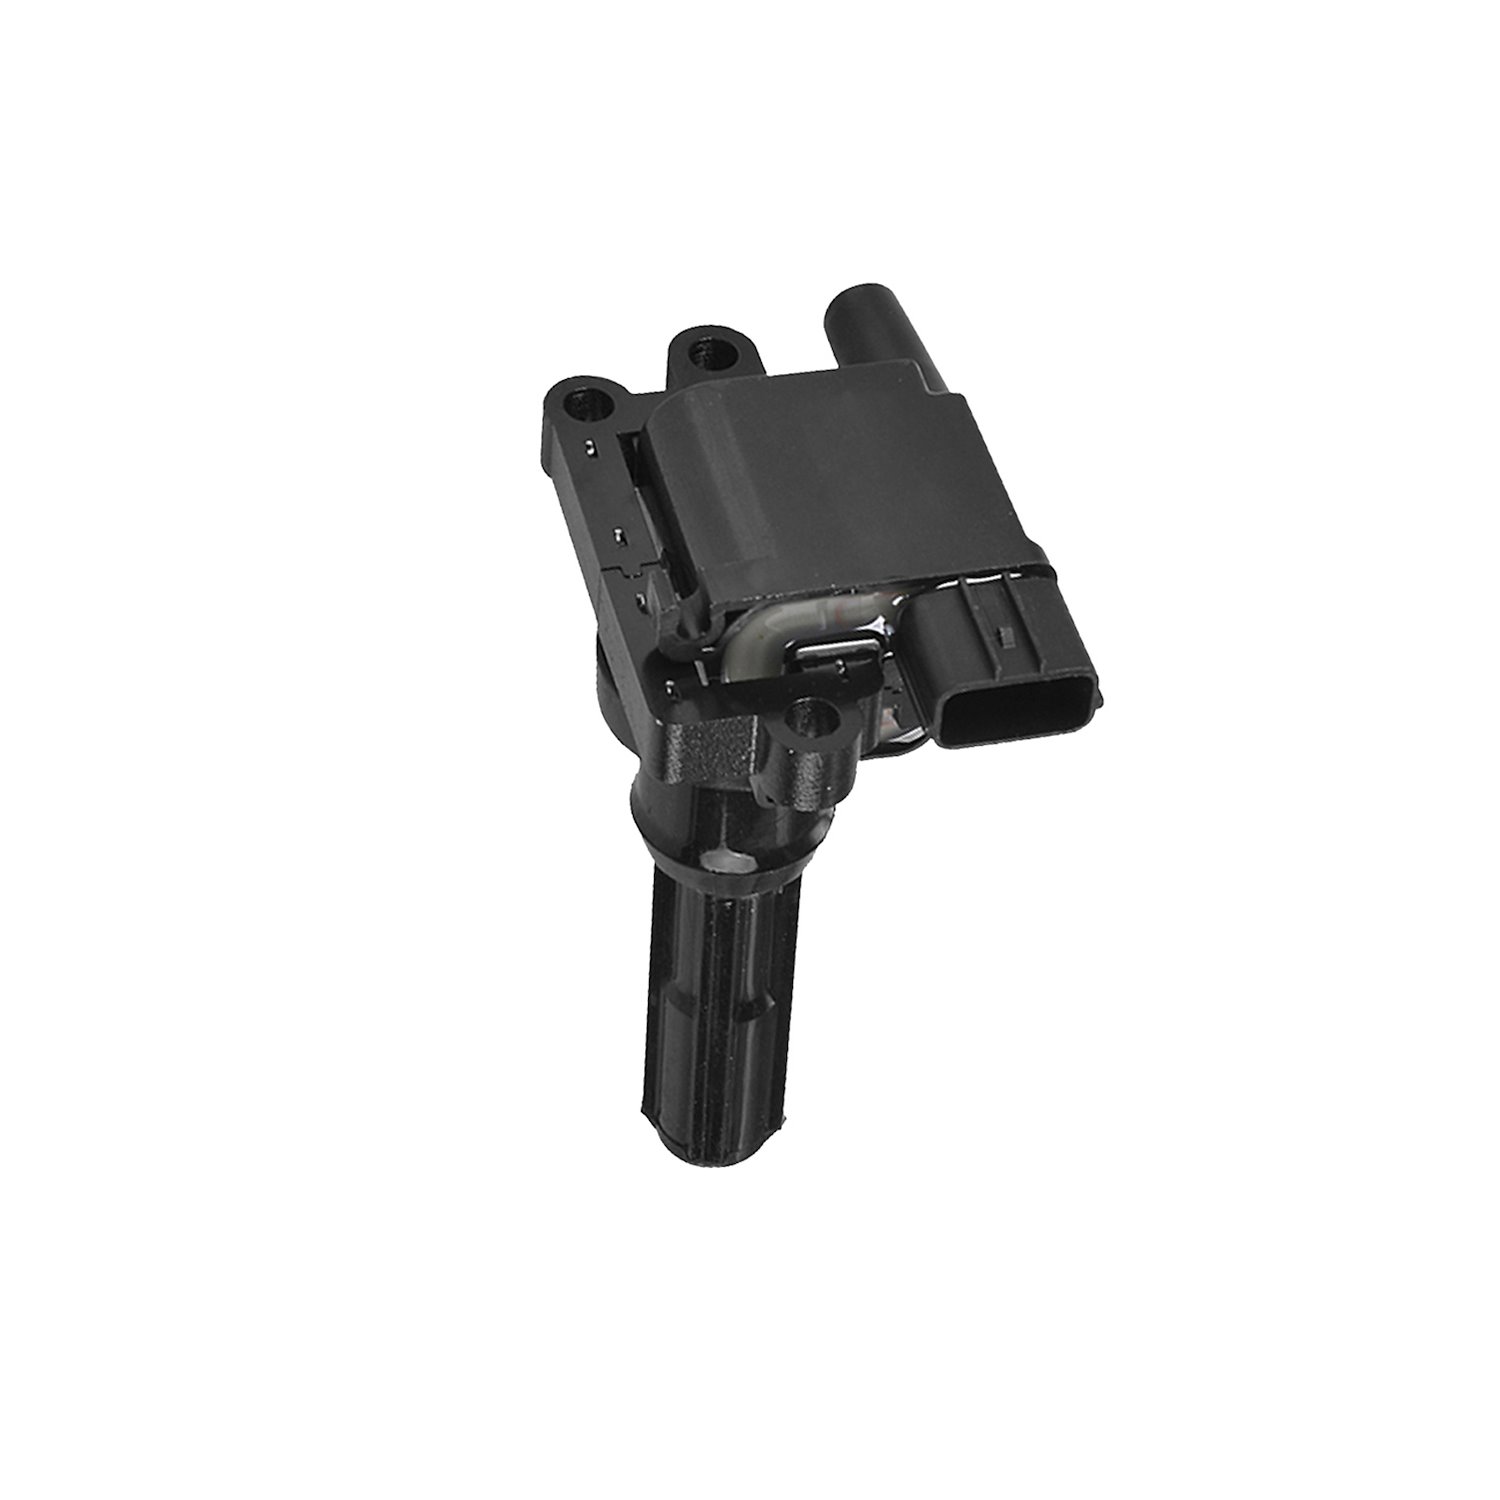 OE Replacement Ignition Coil for Mitsubishi Lancer 2003-2005 L4 2.0L